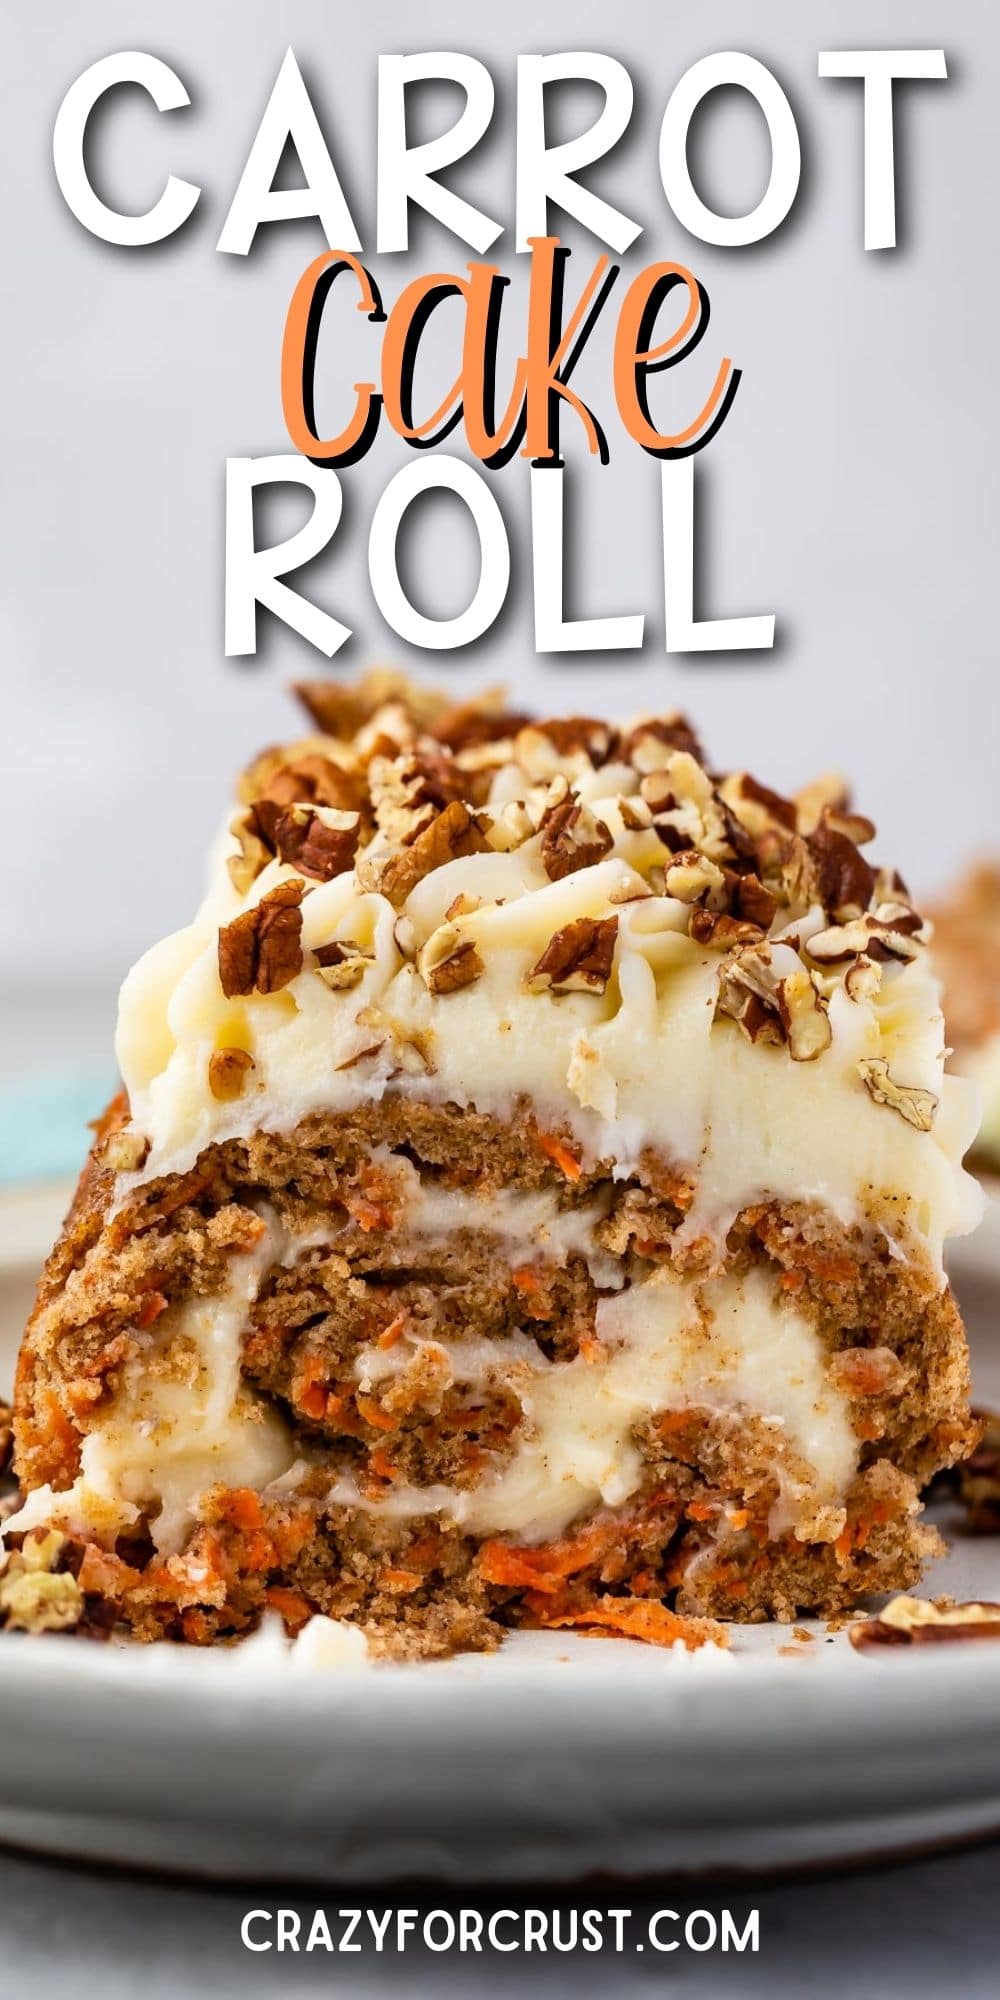 carrot cake roll on white serving dish